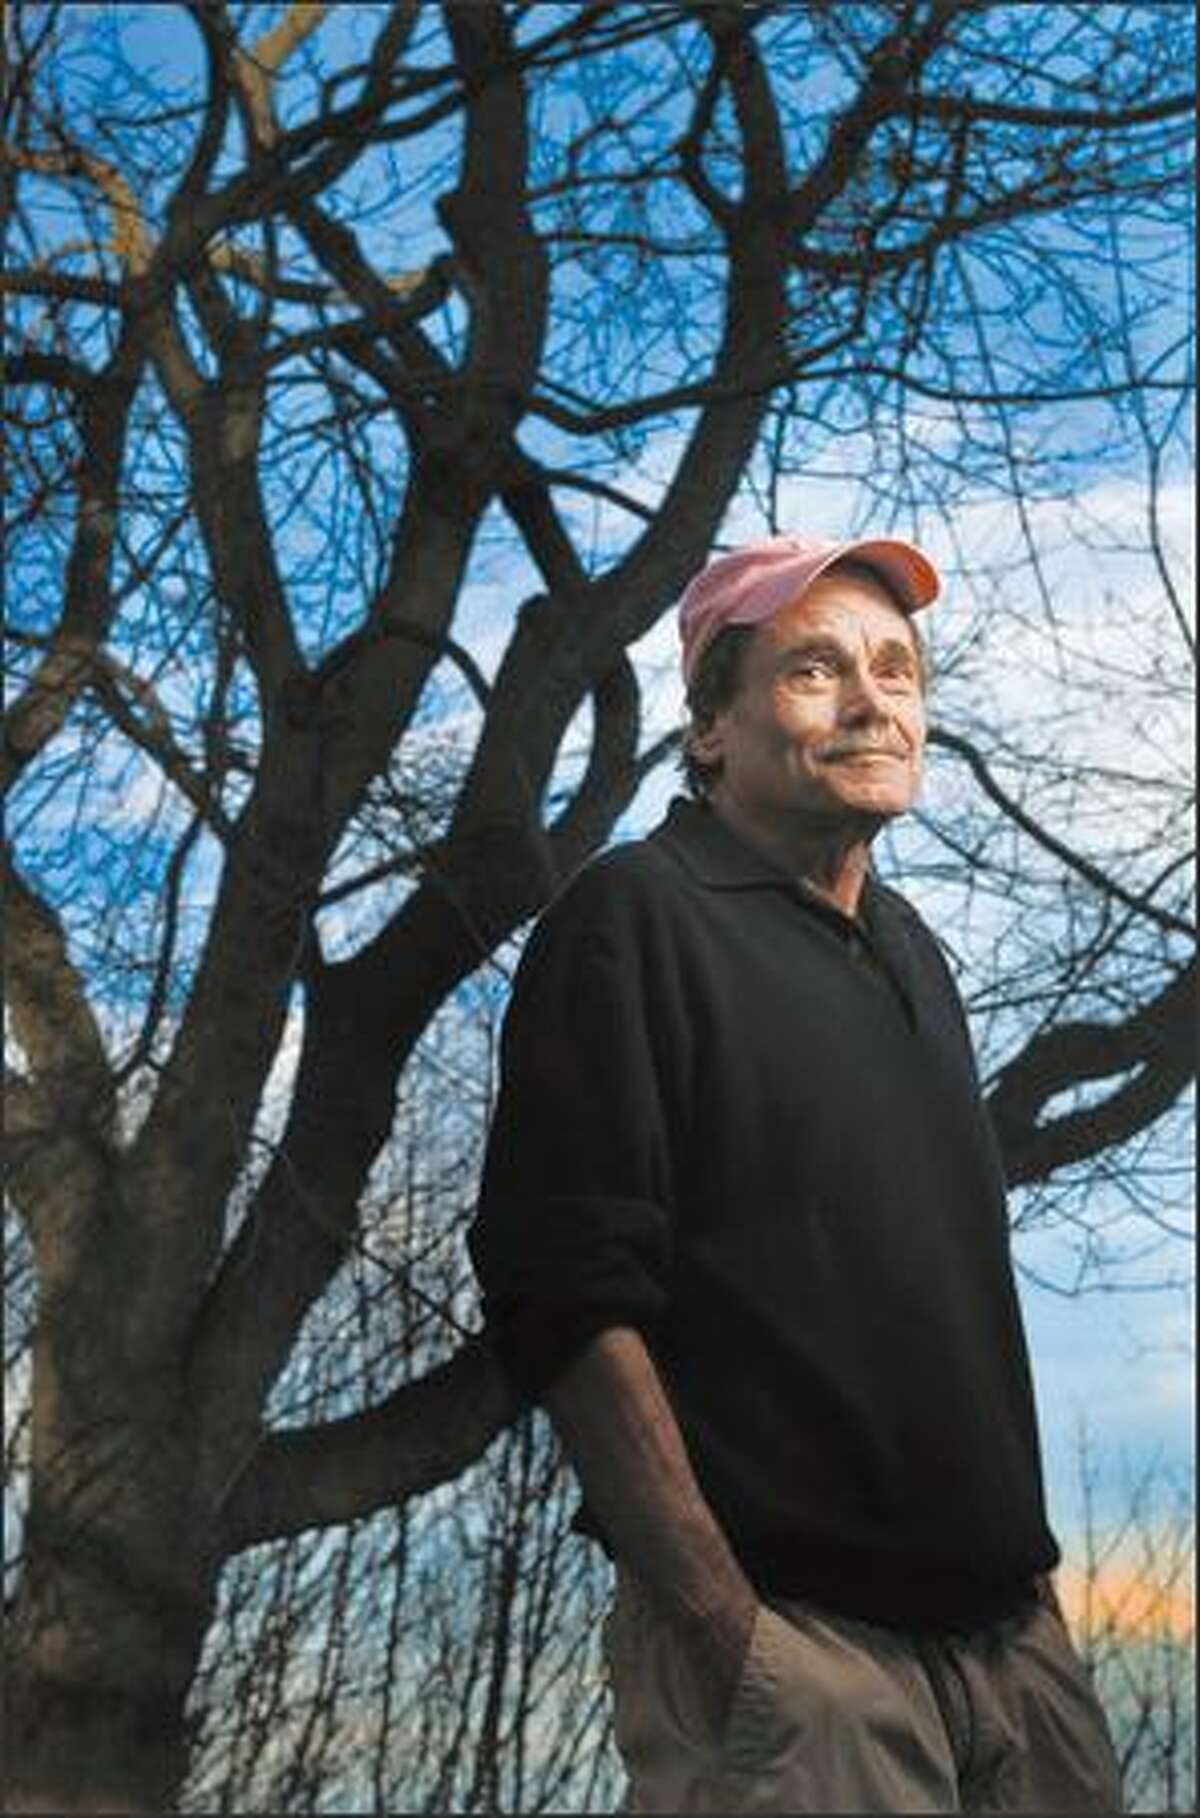 Best known for "Paris Trout," winner of the National Book Award for fiction in 1988, Pete Dexter lives on Whidbey Island.